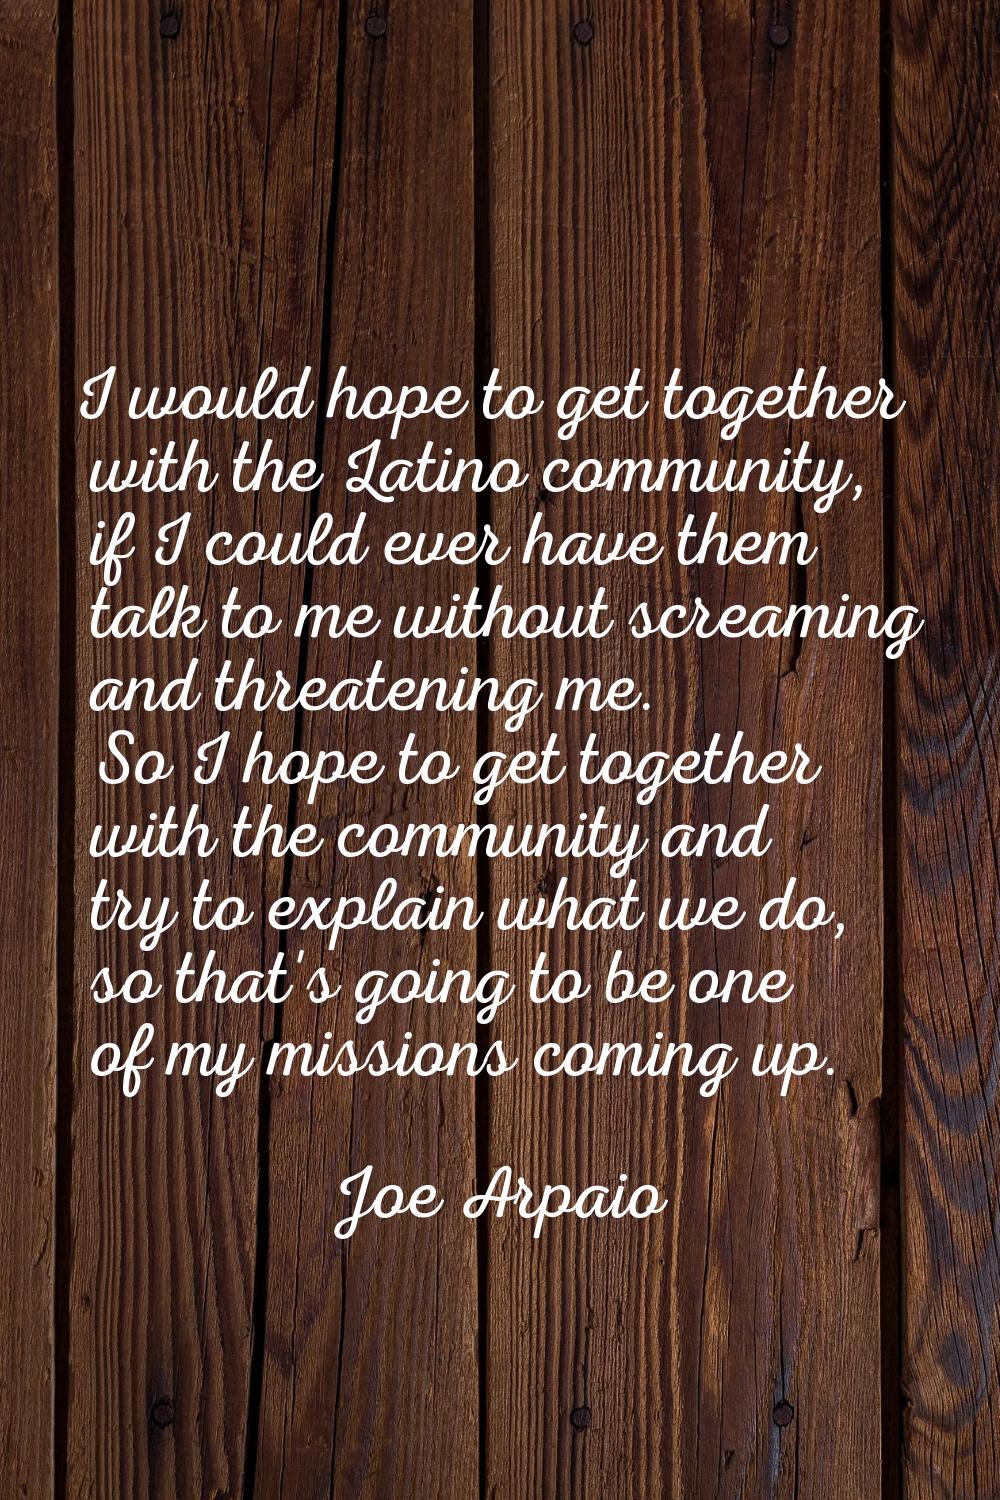 I would hope to get together with the Latino community, if I could ever have them talk to me withou